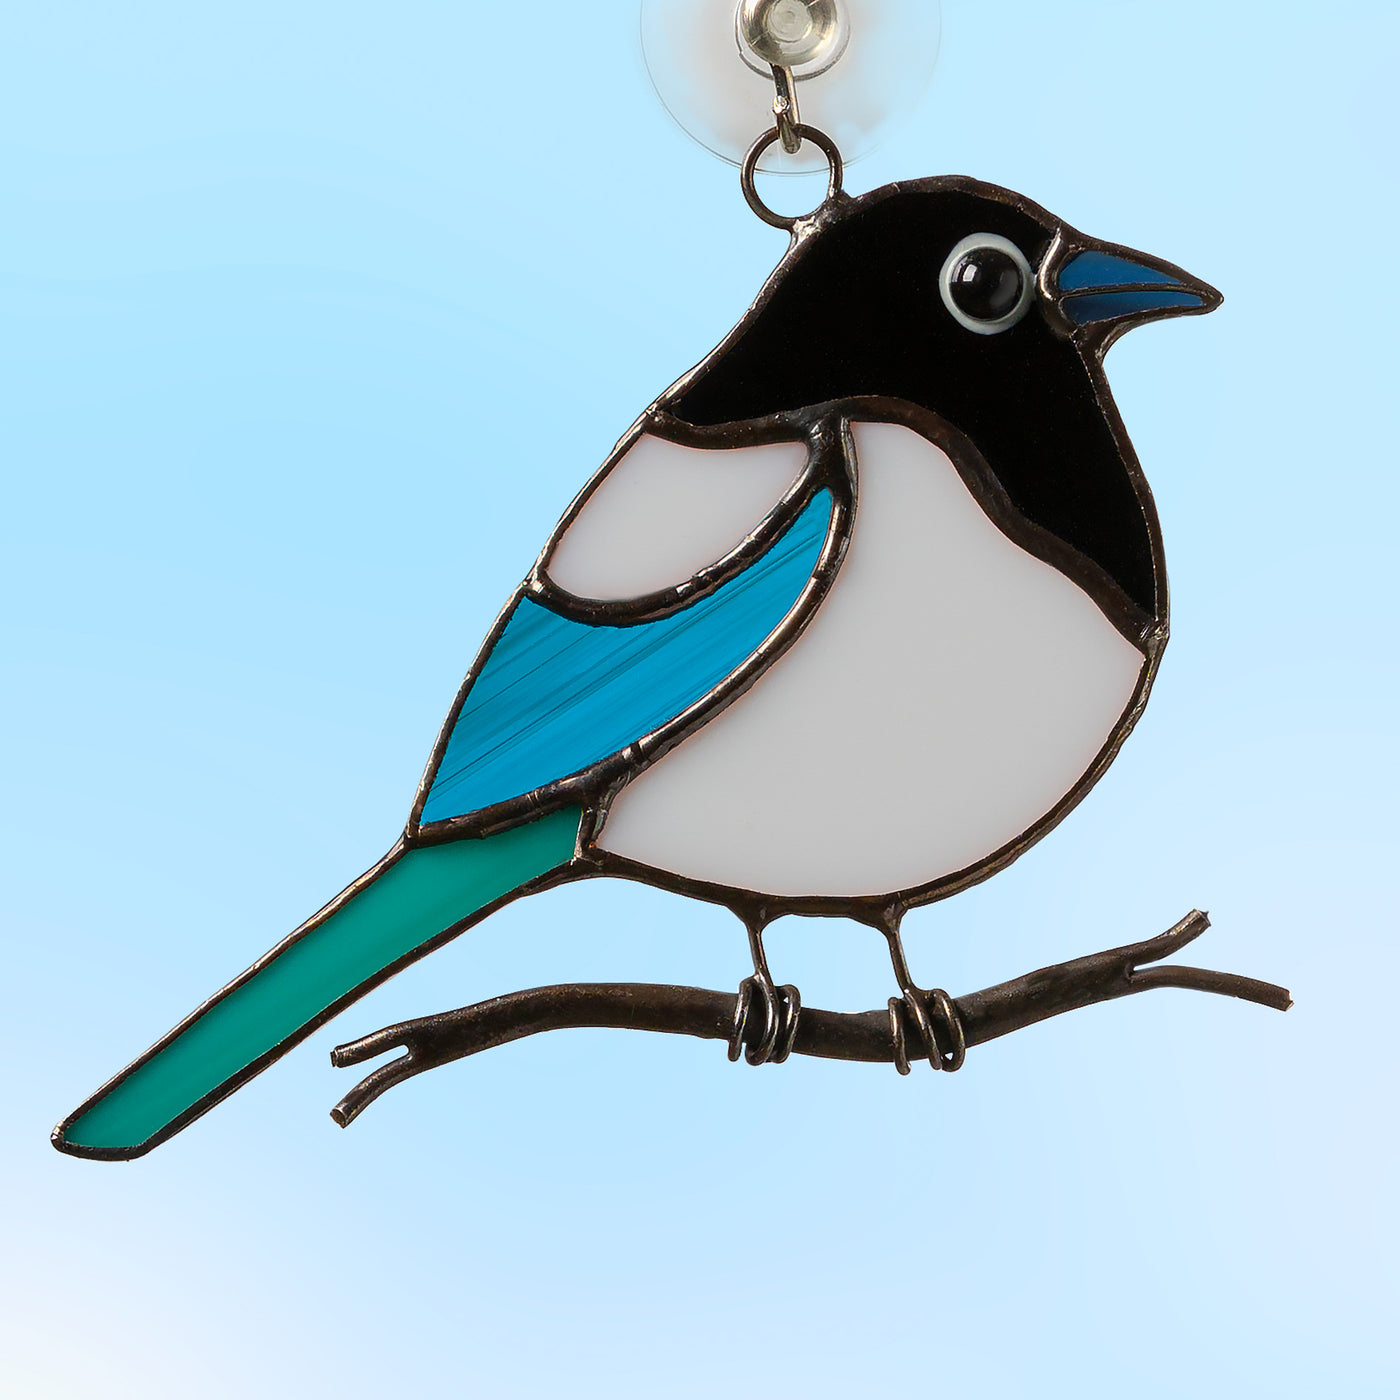 small fat magpie sitting on a branch stained glass suncatcher  Edit alt text